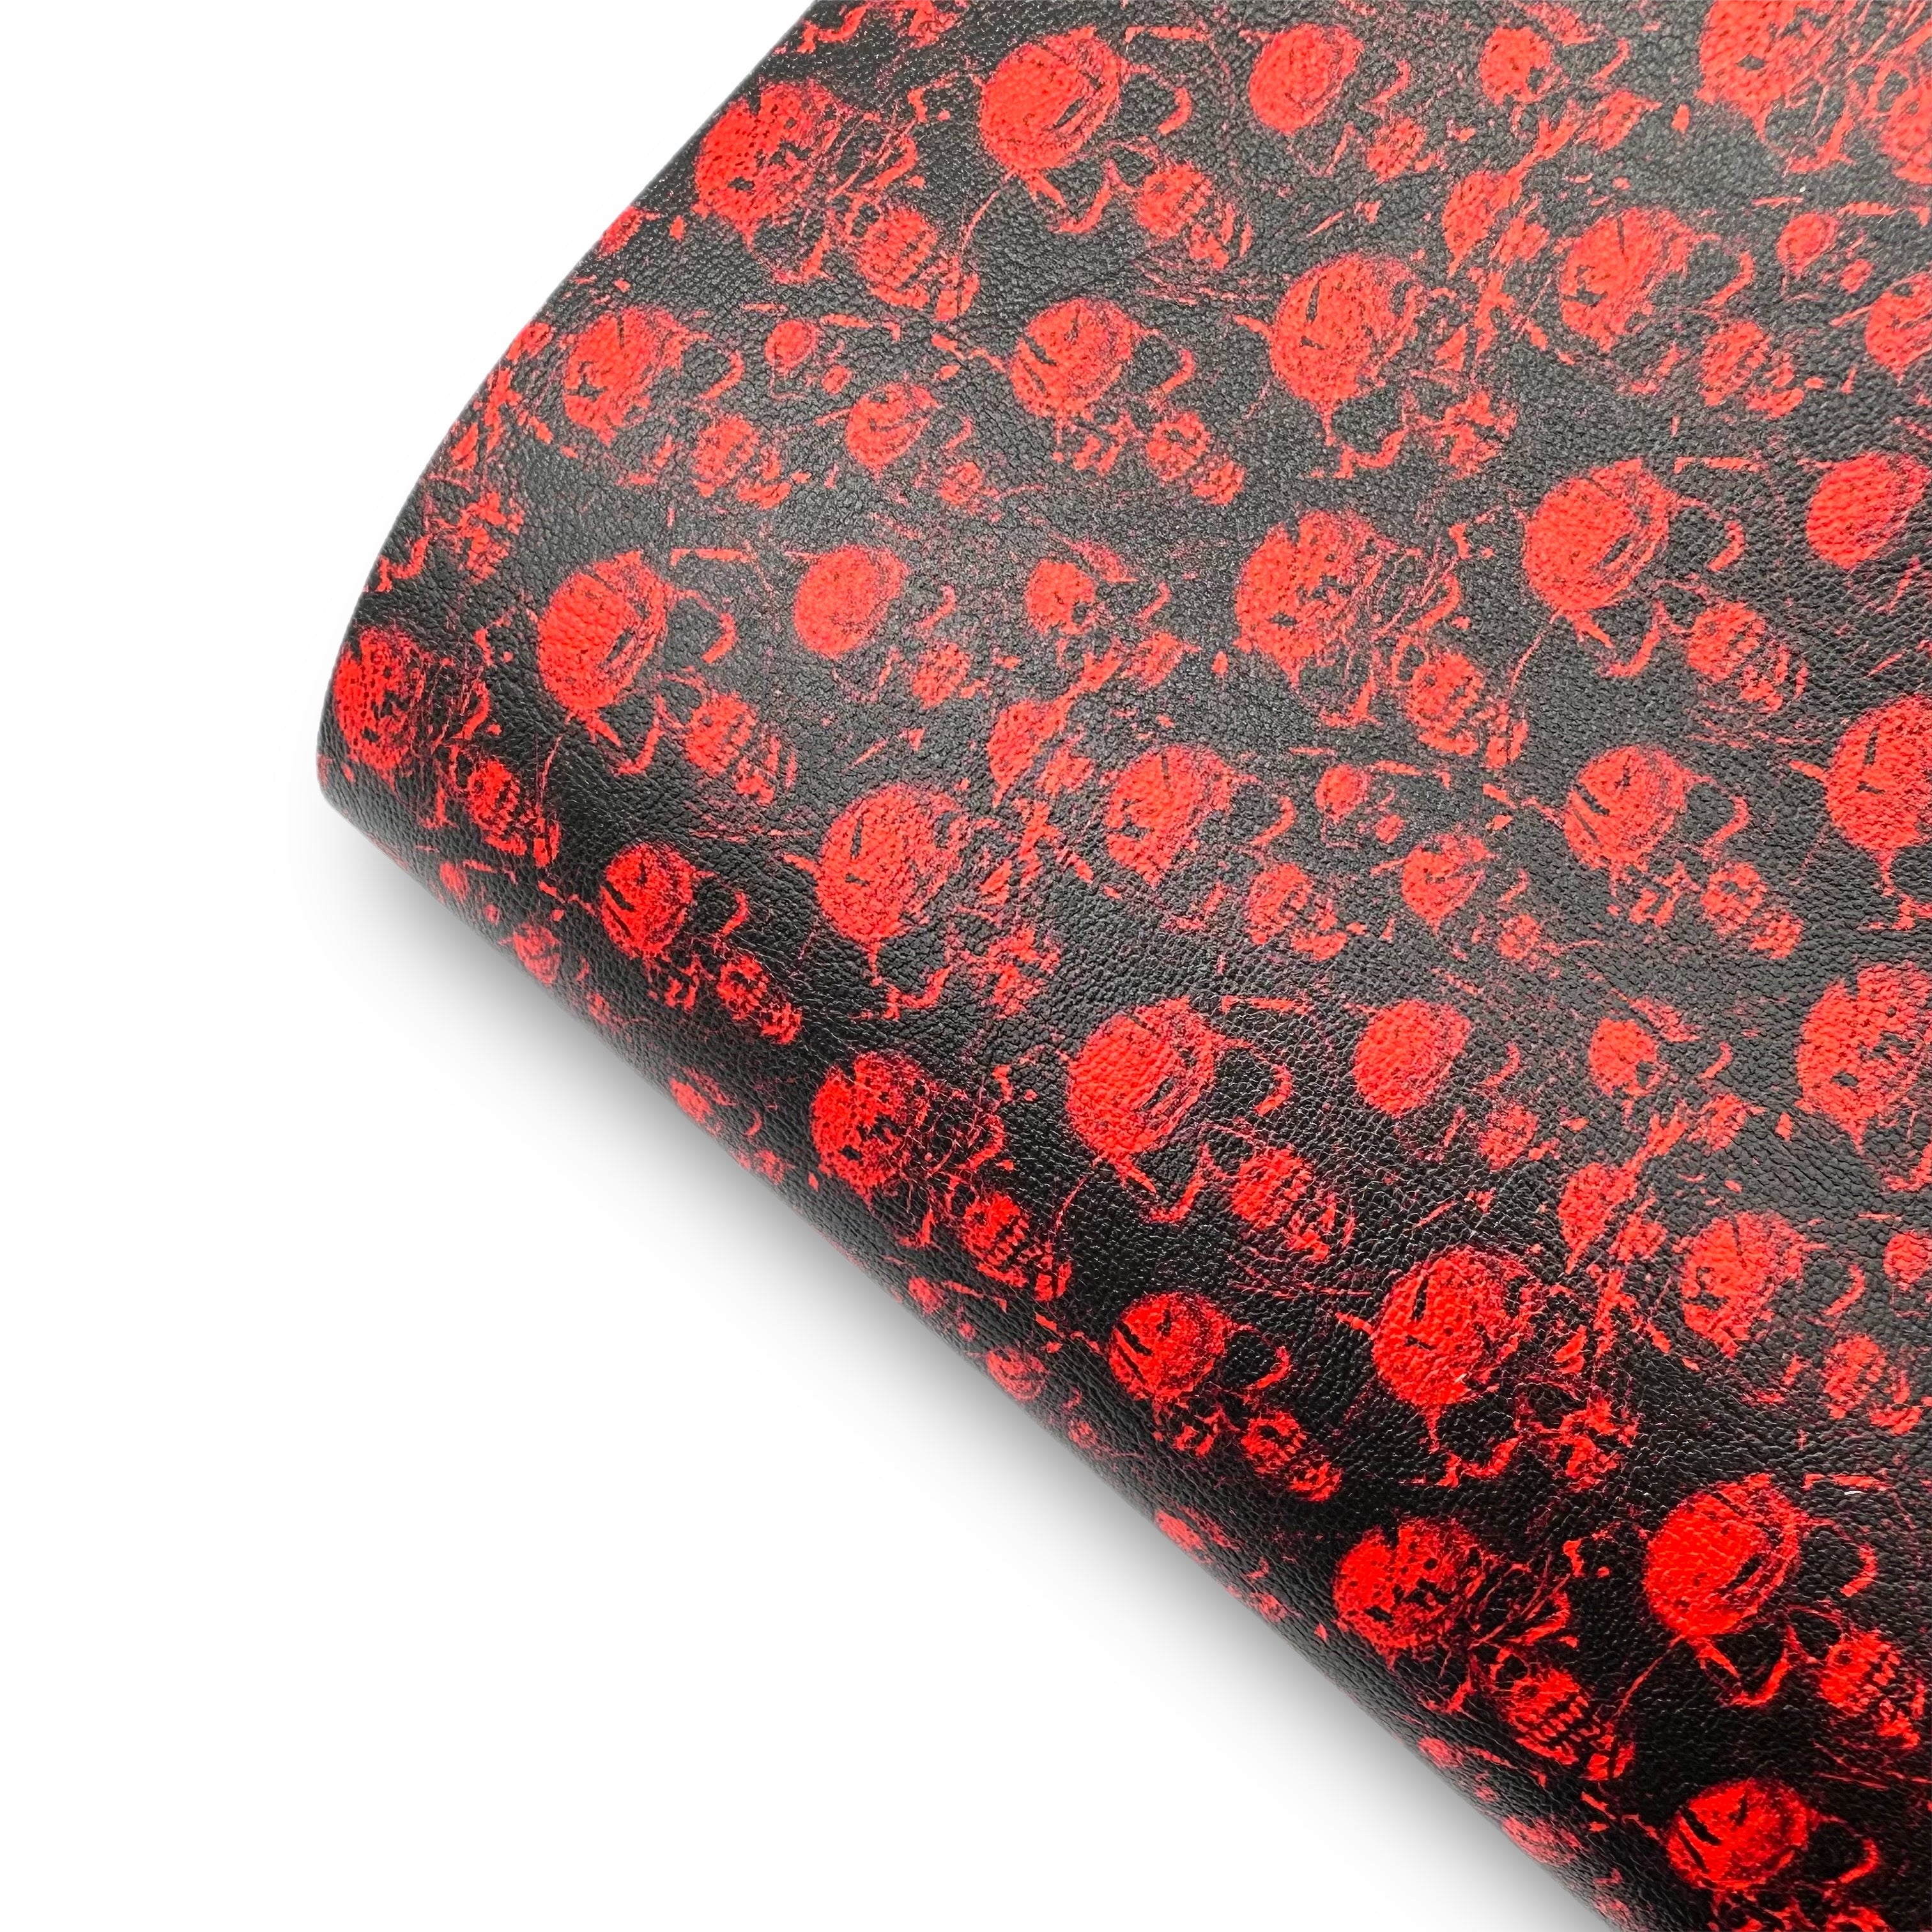 Bloody Skulls Premium Faux Leather Fabric Sheets